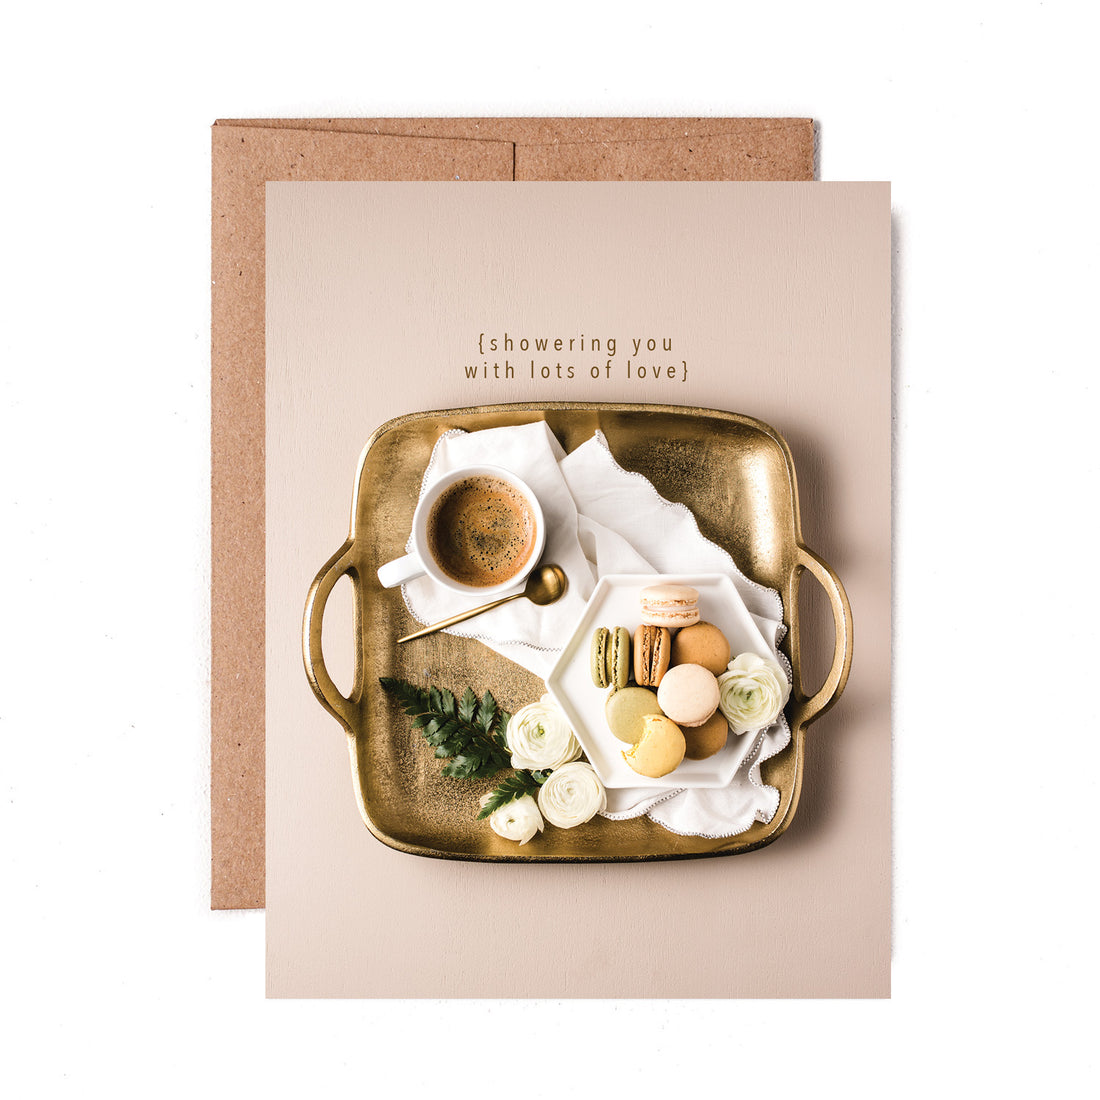 A top-down photo of a gold tray on a tan background, with a white cup of hot cocoa, a white plate of macaroons and white rose blooms, &quot;{showering you with lots of love}&quot; printed above the tray.